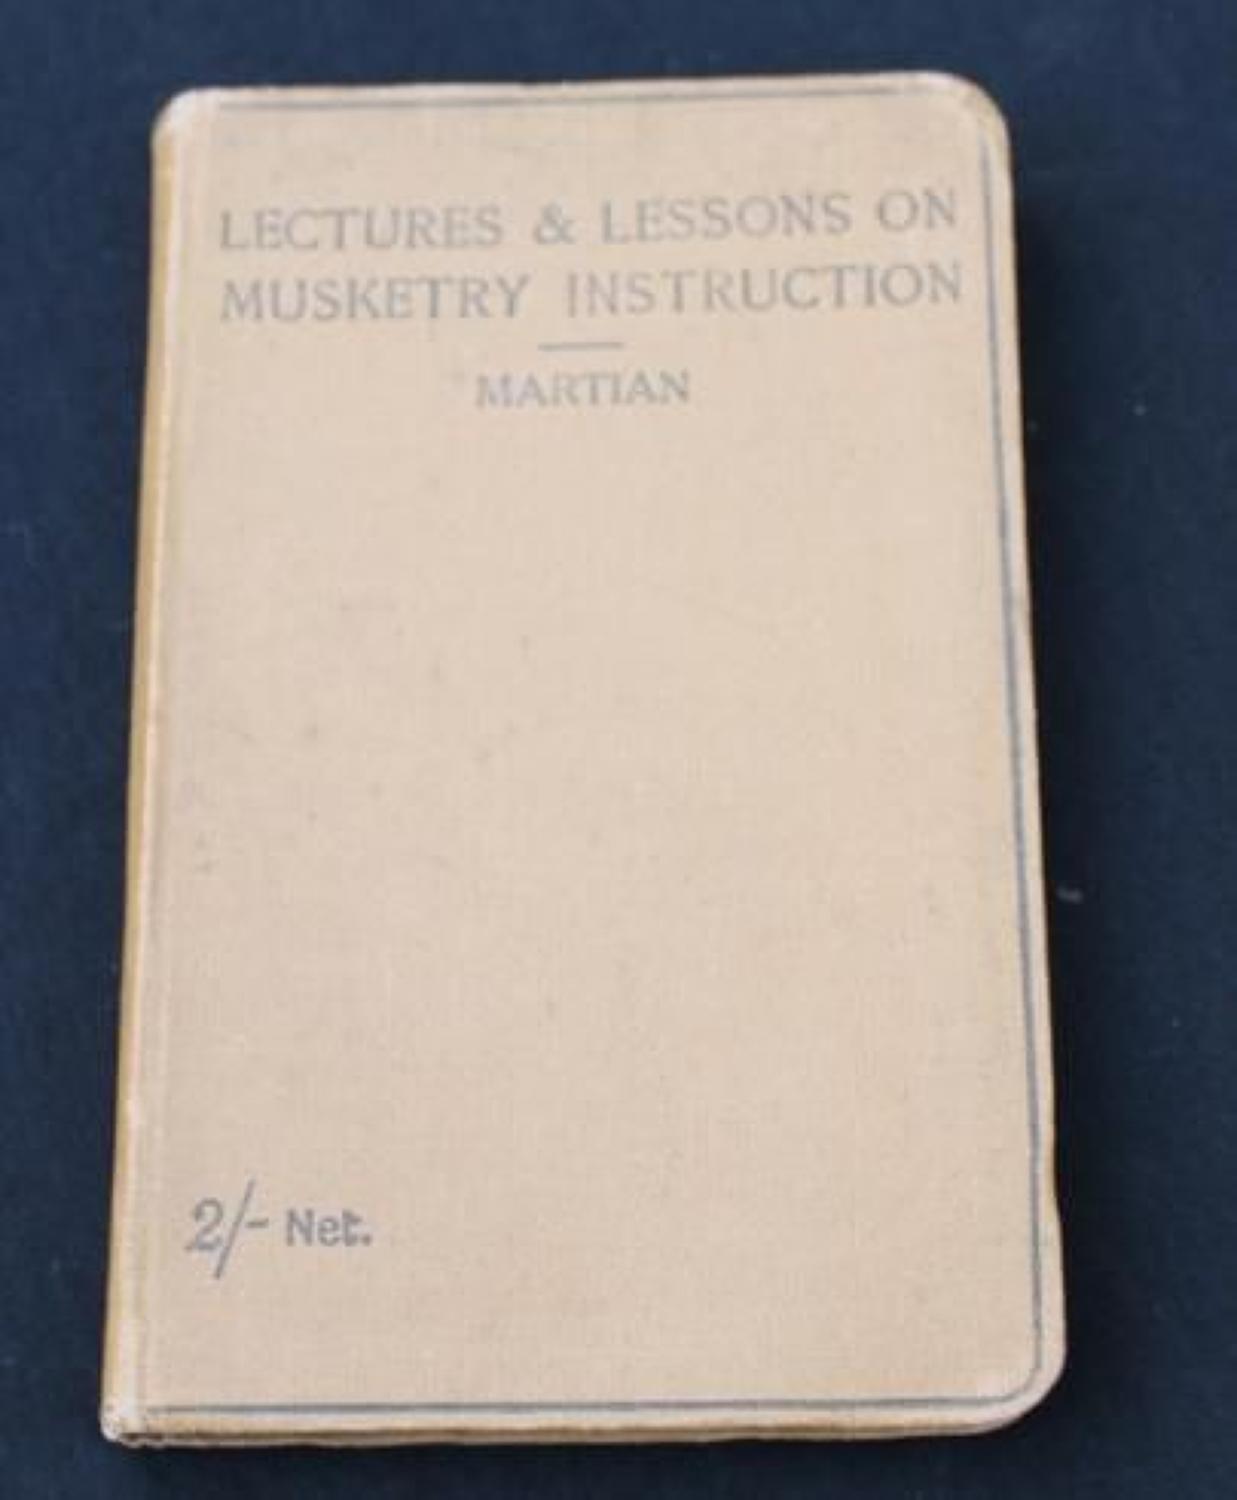 Lectures and Lessons on Musketry Instruction